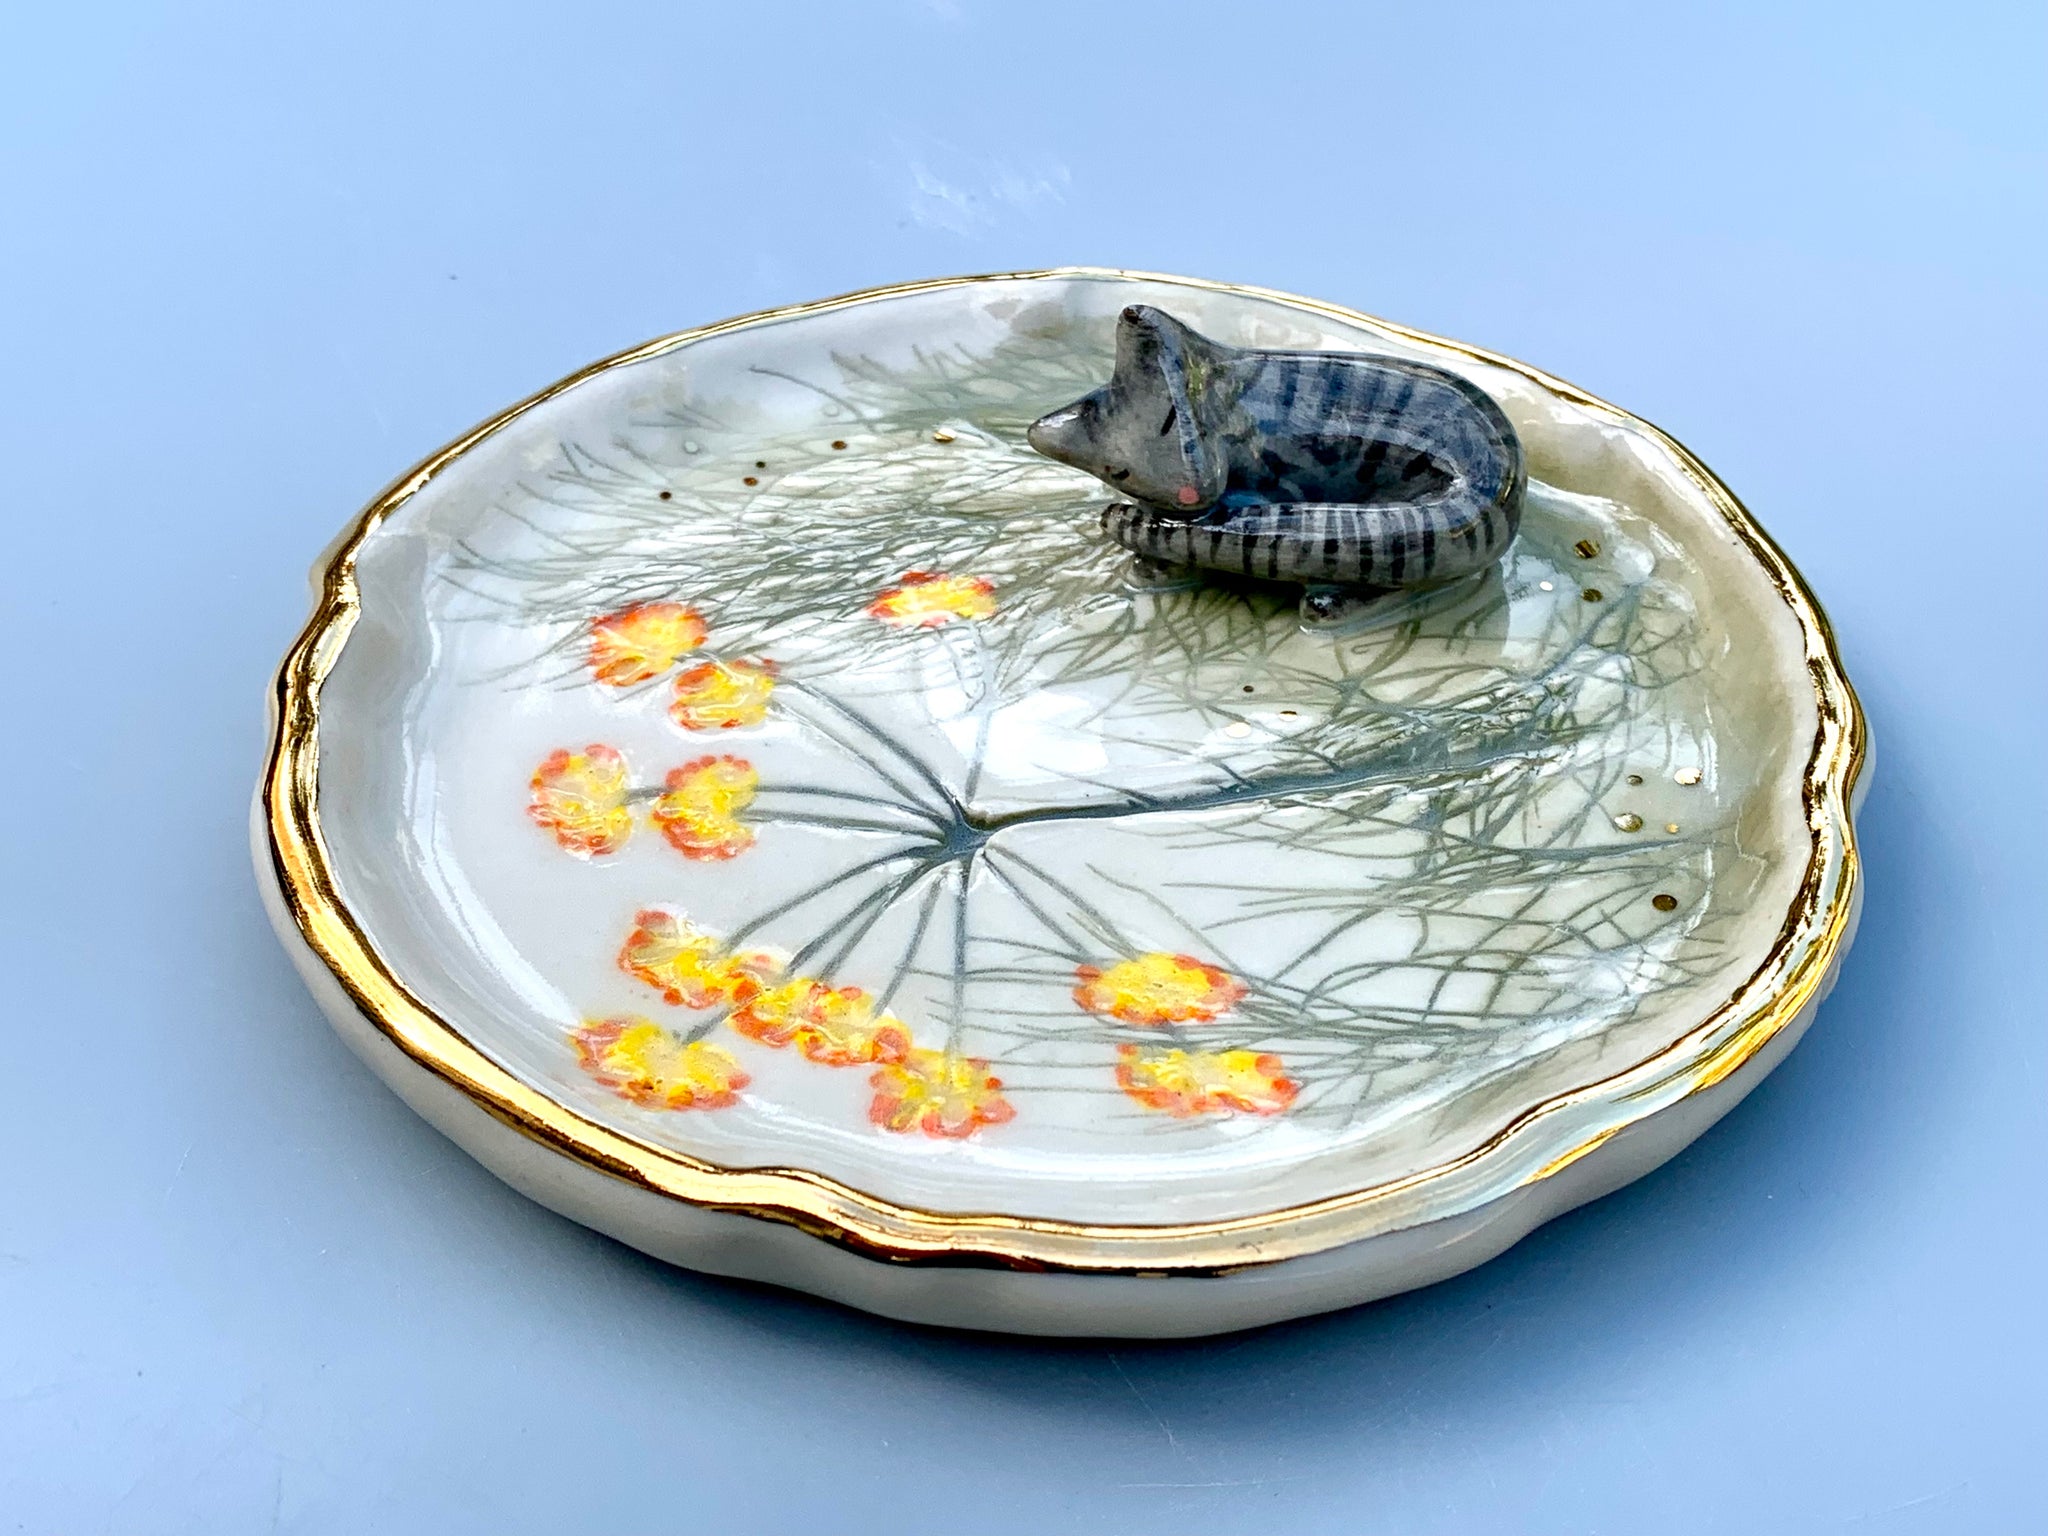 Sleeping Tabby Cat Jewelry Dish with Fennel Flower and Gold Accent